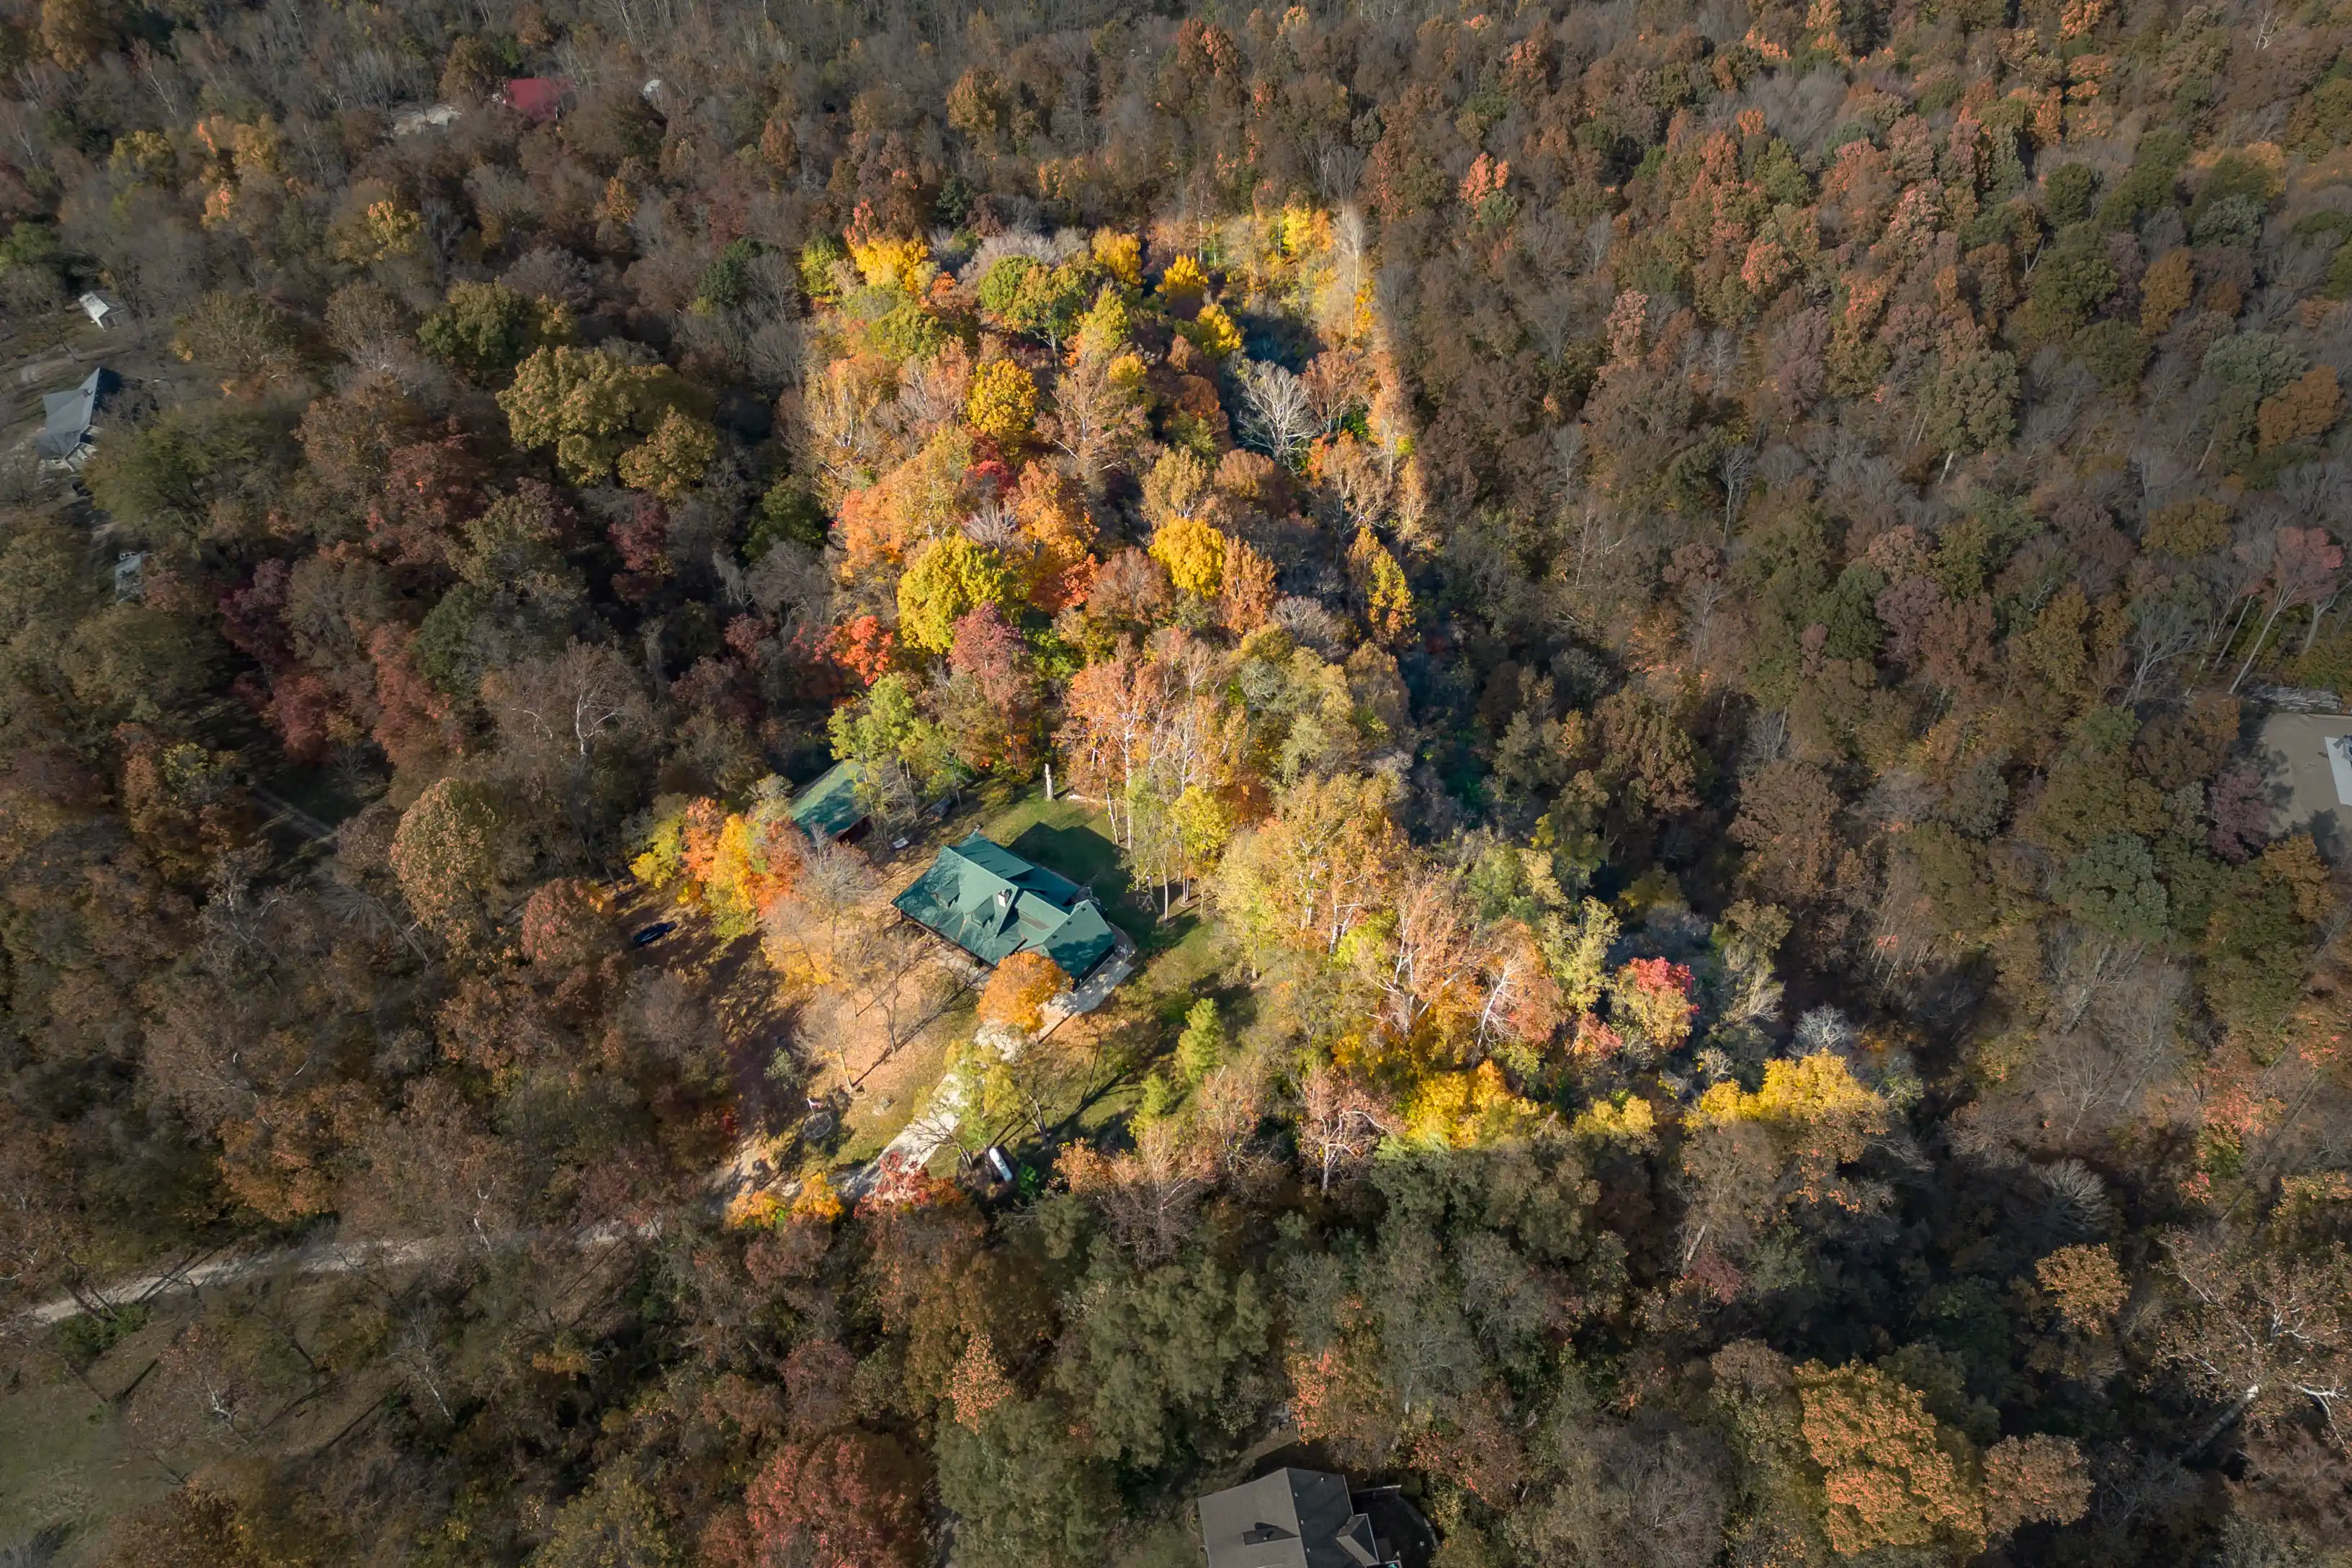 Aerial view of a house surrounded by a dense forest in autumn colors.